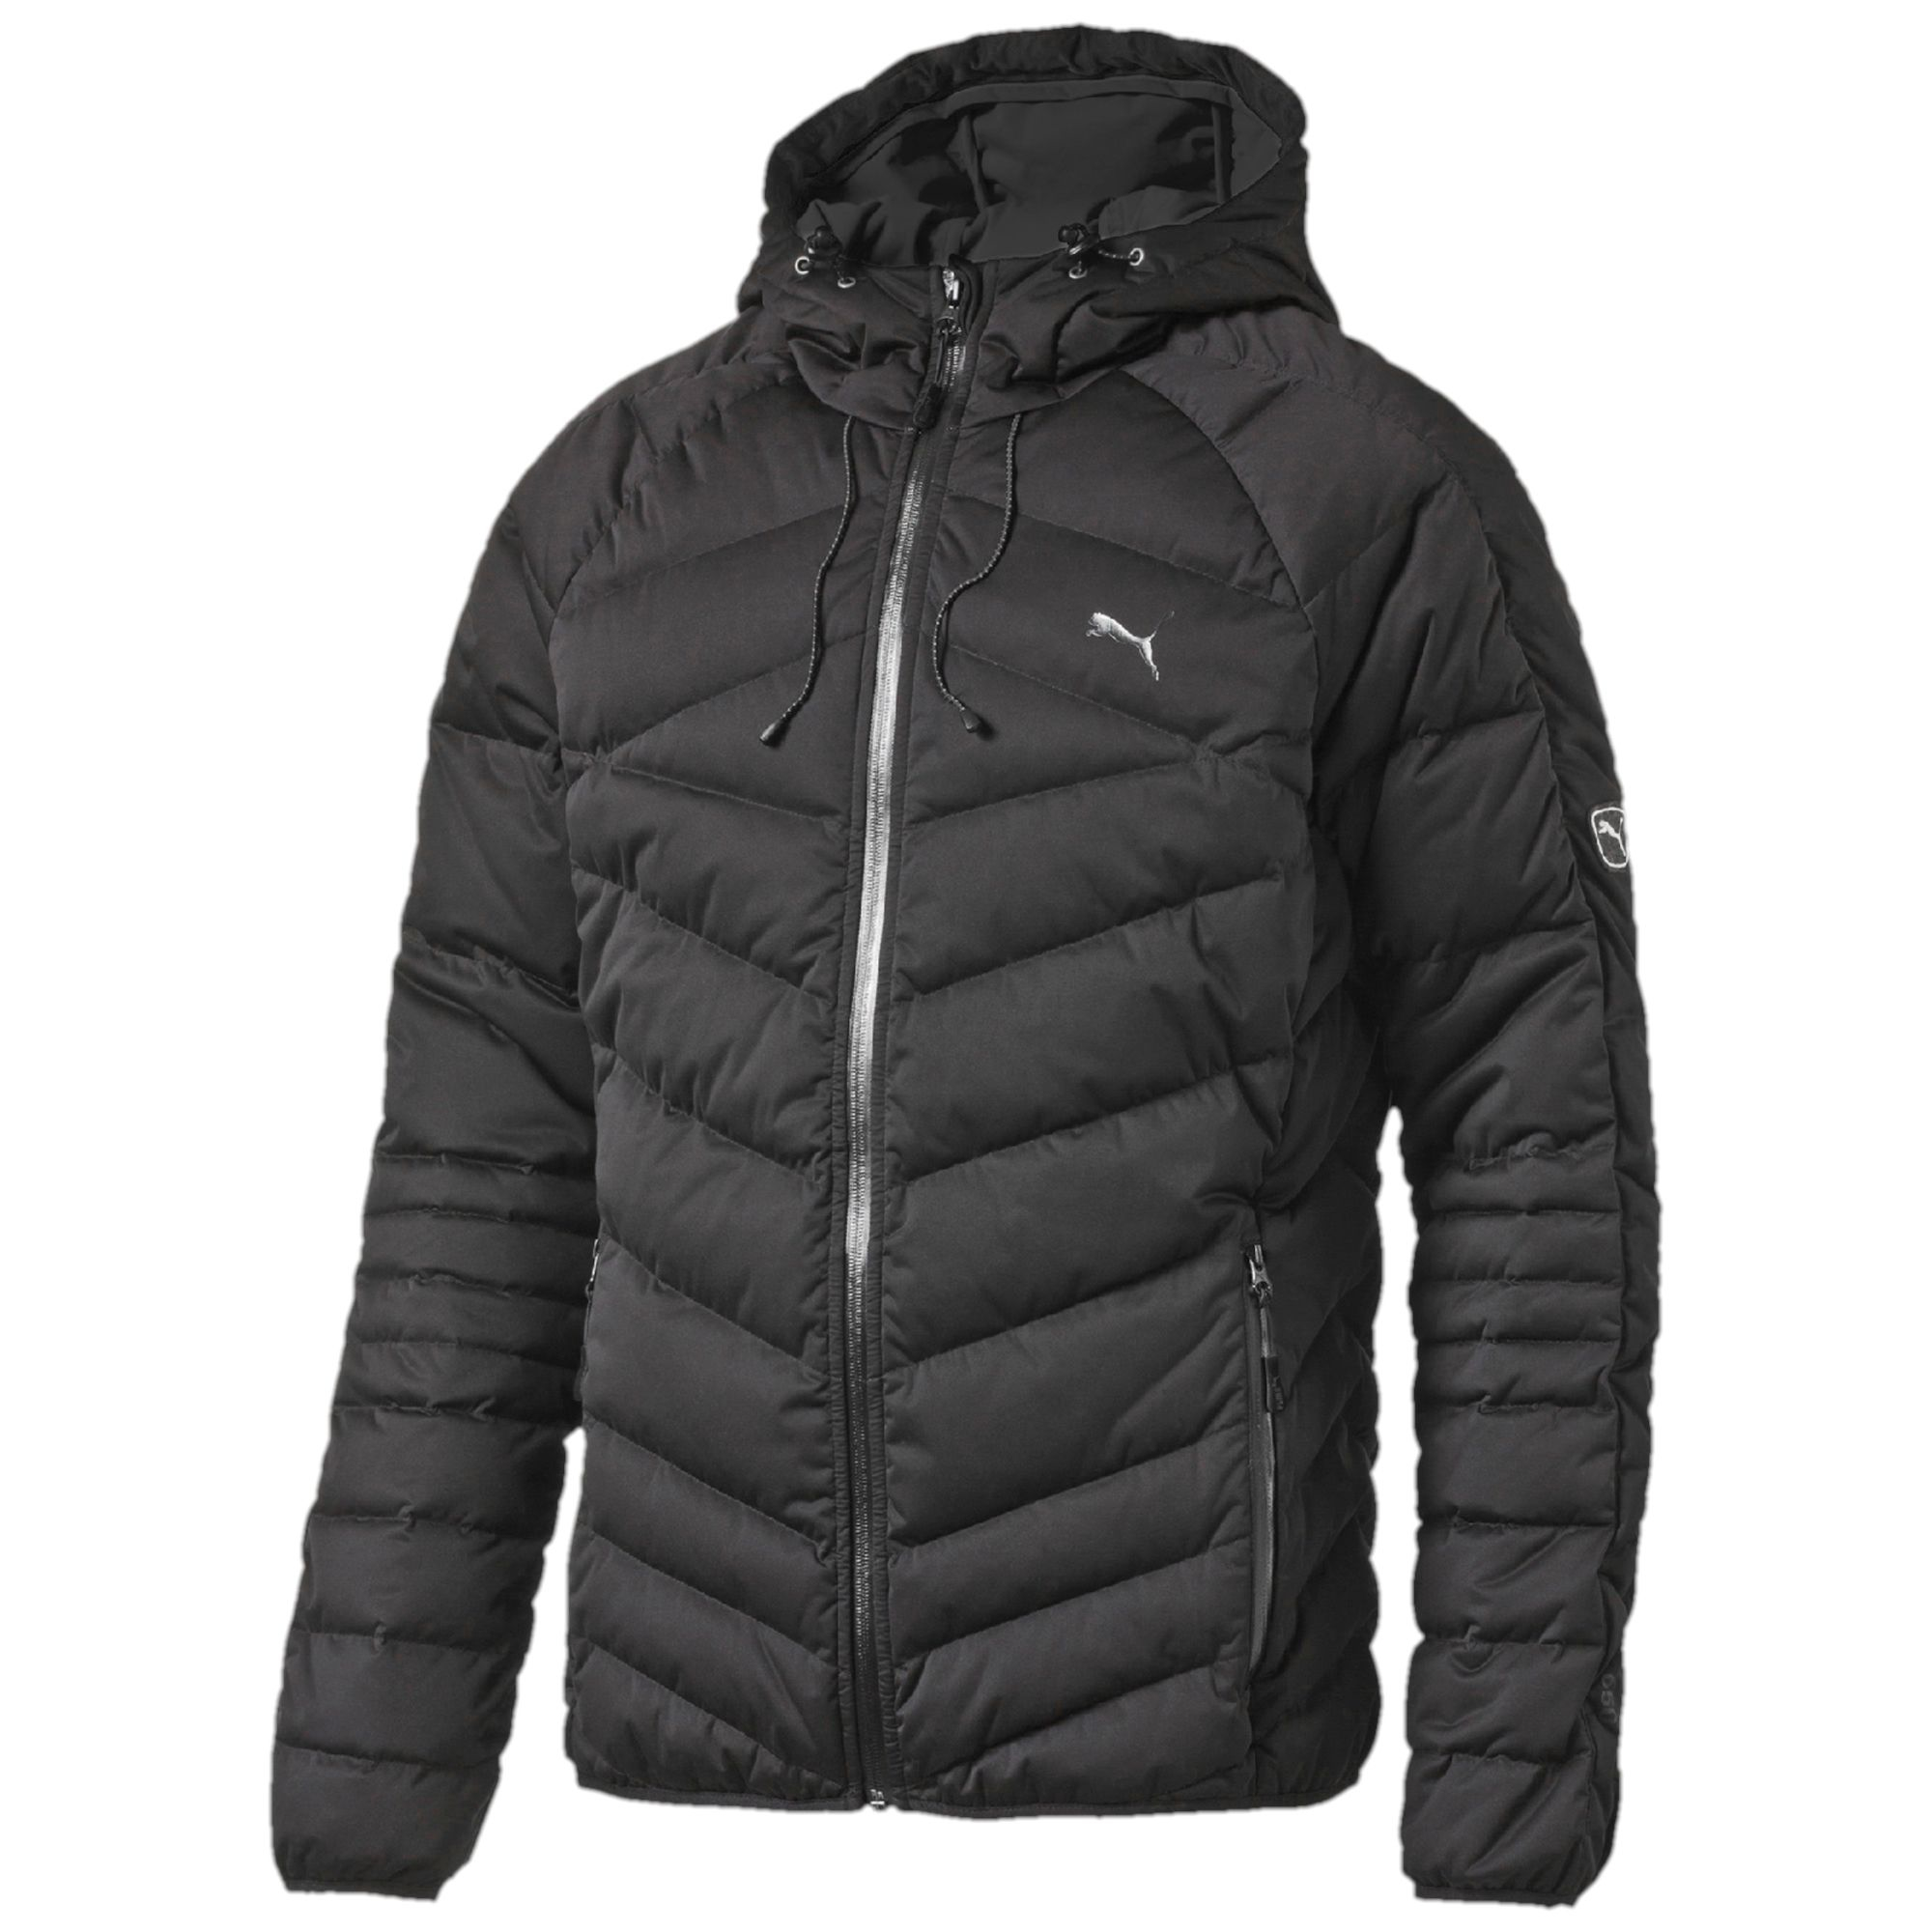 PUMA Active 600 Stretchlight Hooded Down Jacket in Black for Men - Lyst